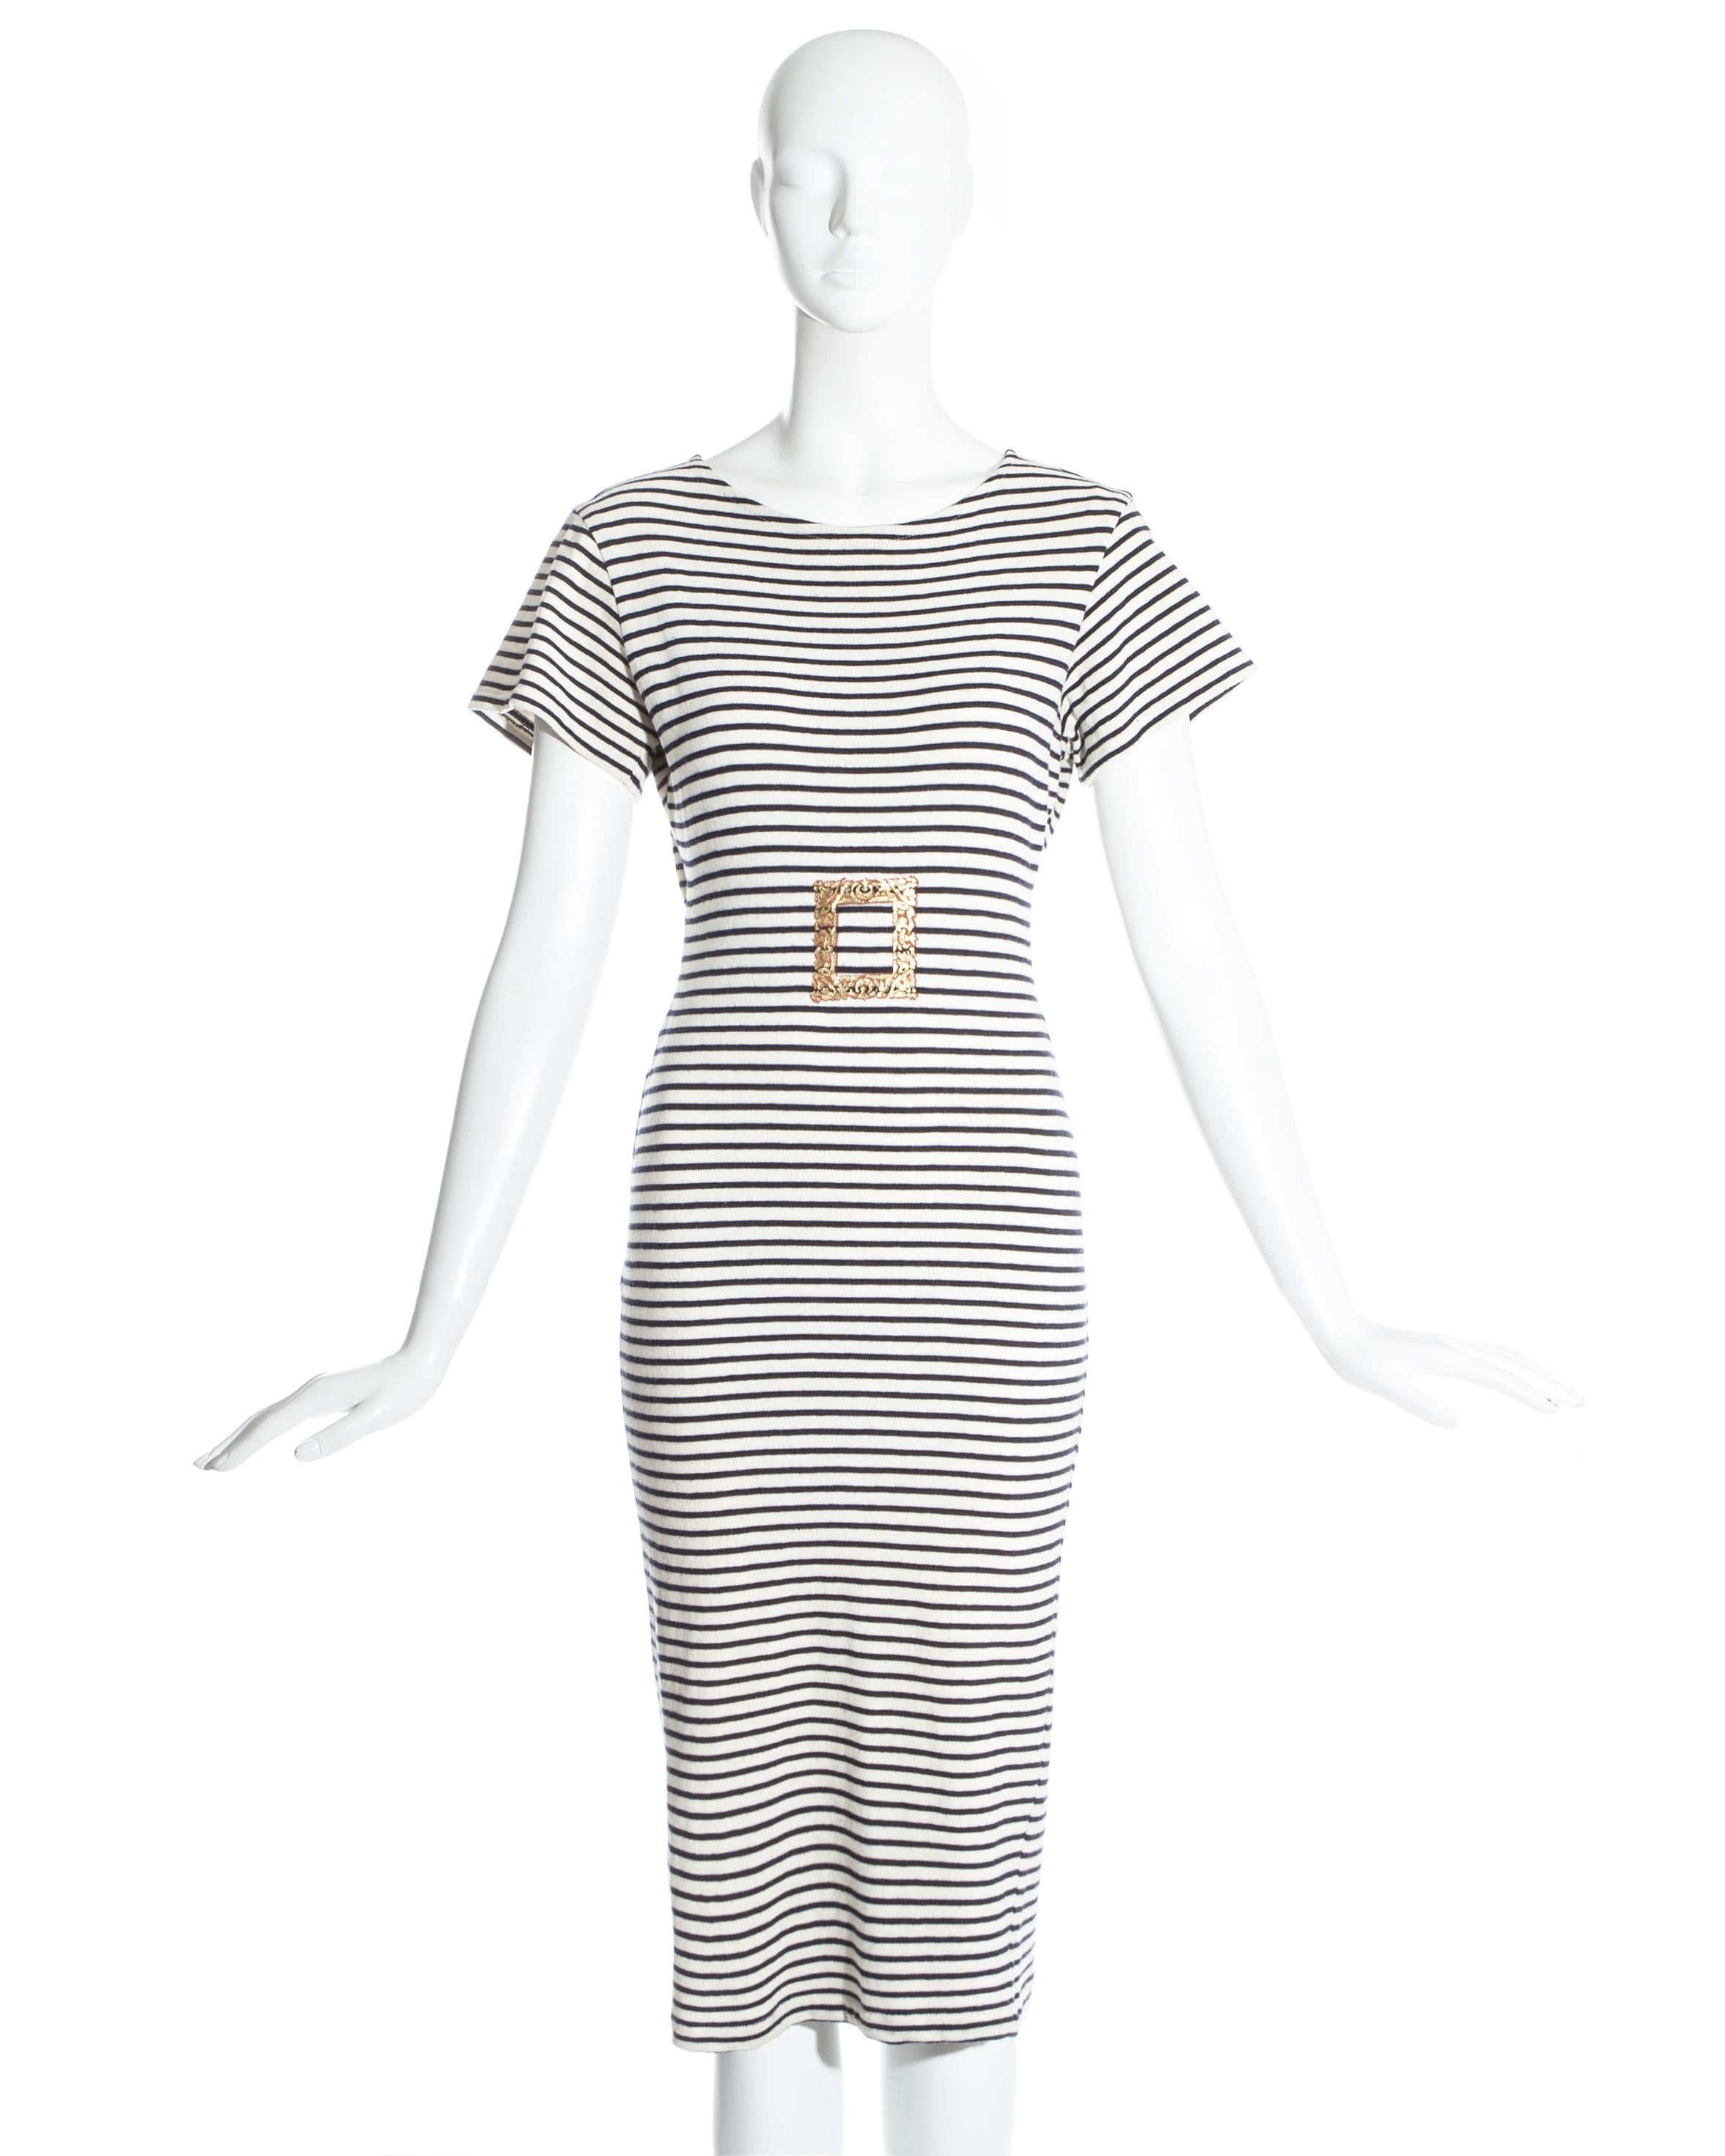 Vivienne Westwood navy blue and white striped cotton jersey dress with printed baroque metallic gold picture frame.  

Civilizade, Spring-Summer 1989
